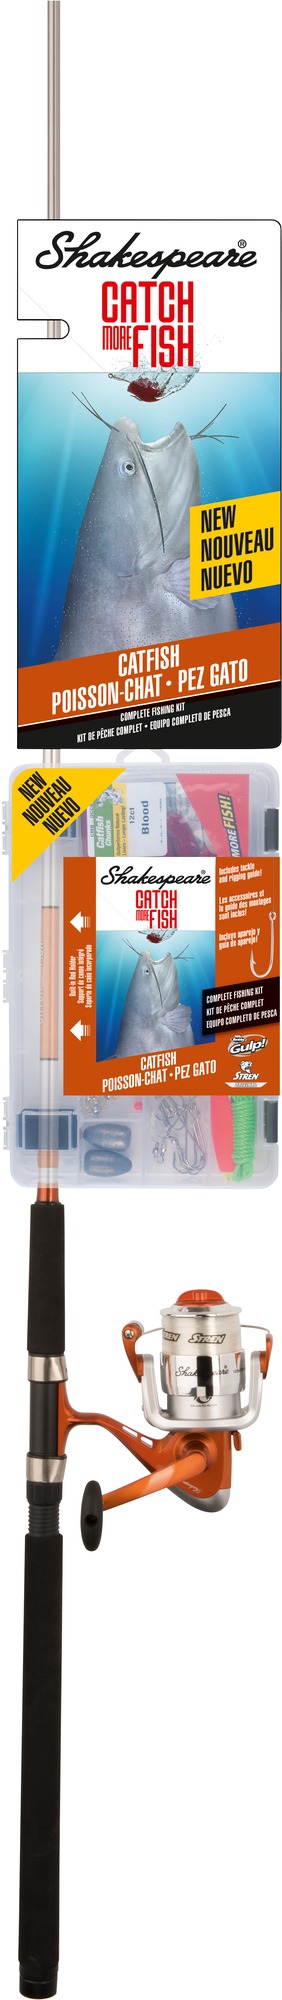 Shakespeare CMF2CATFISH Catch More Fish Cat Fish Combo, includes